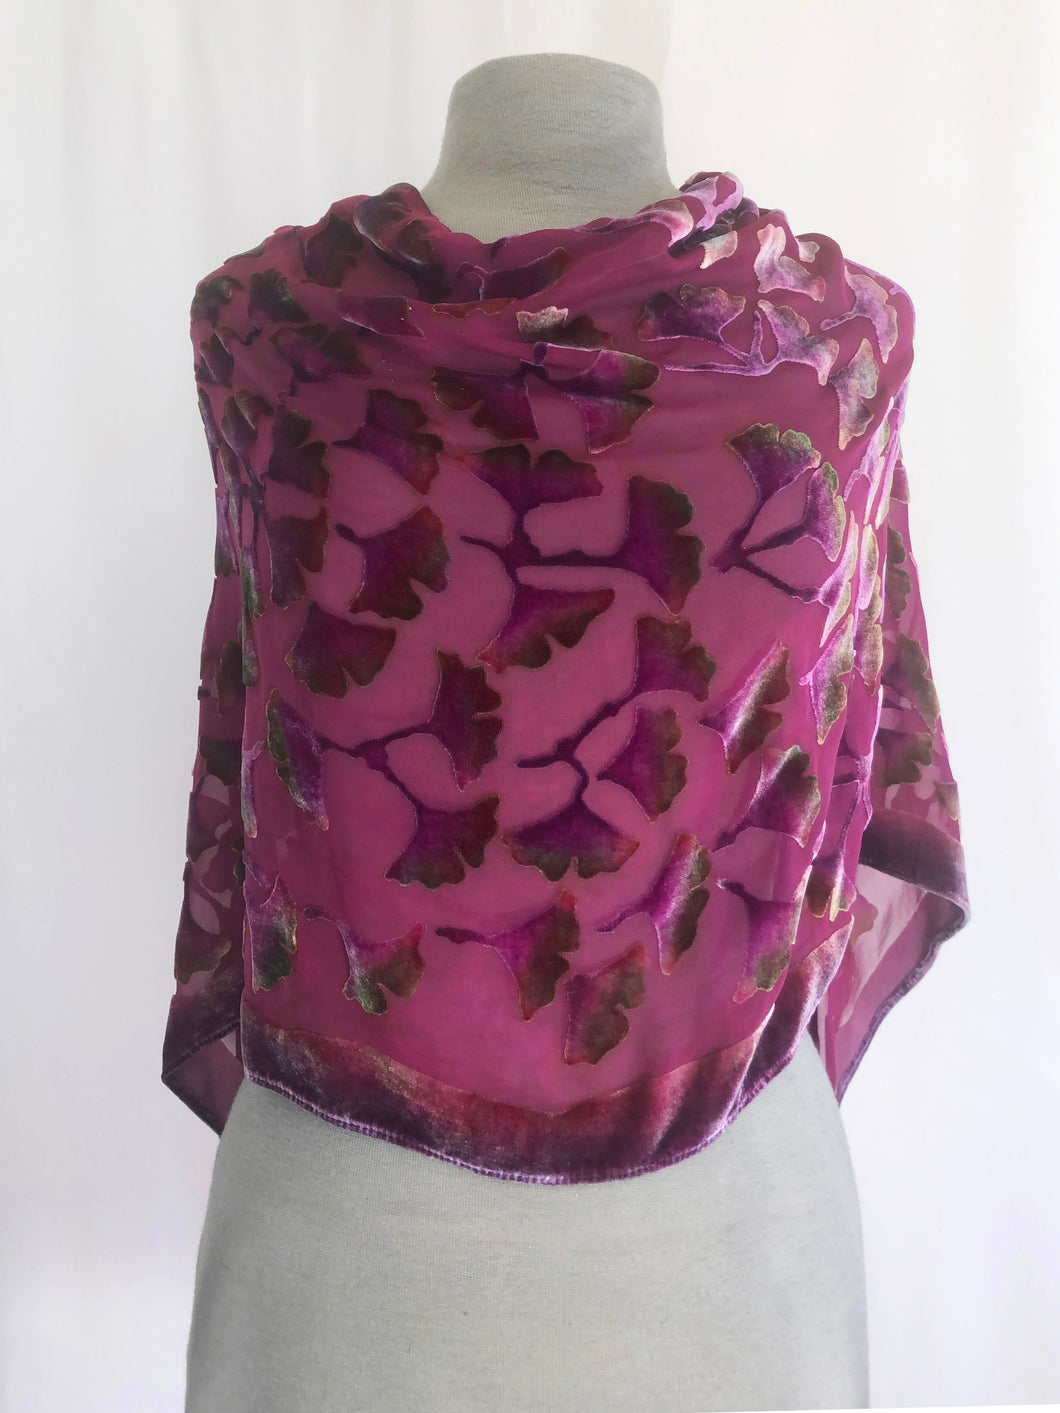 Poncho/Scarf in Berry